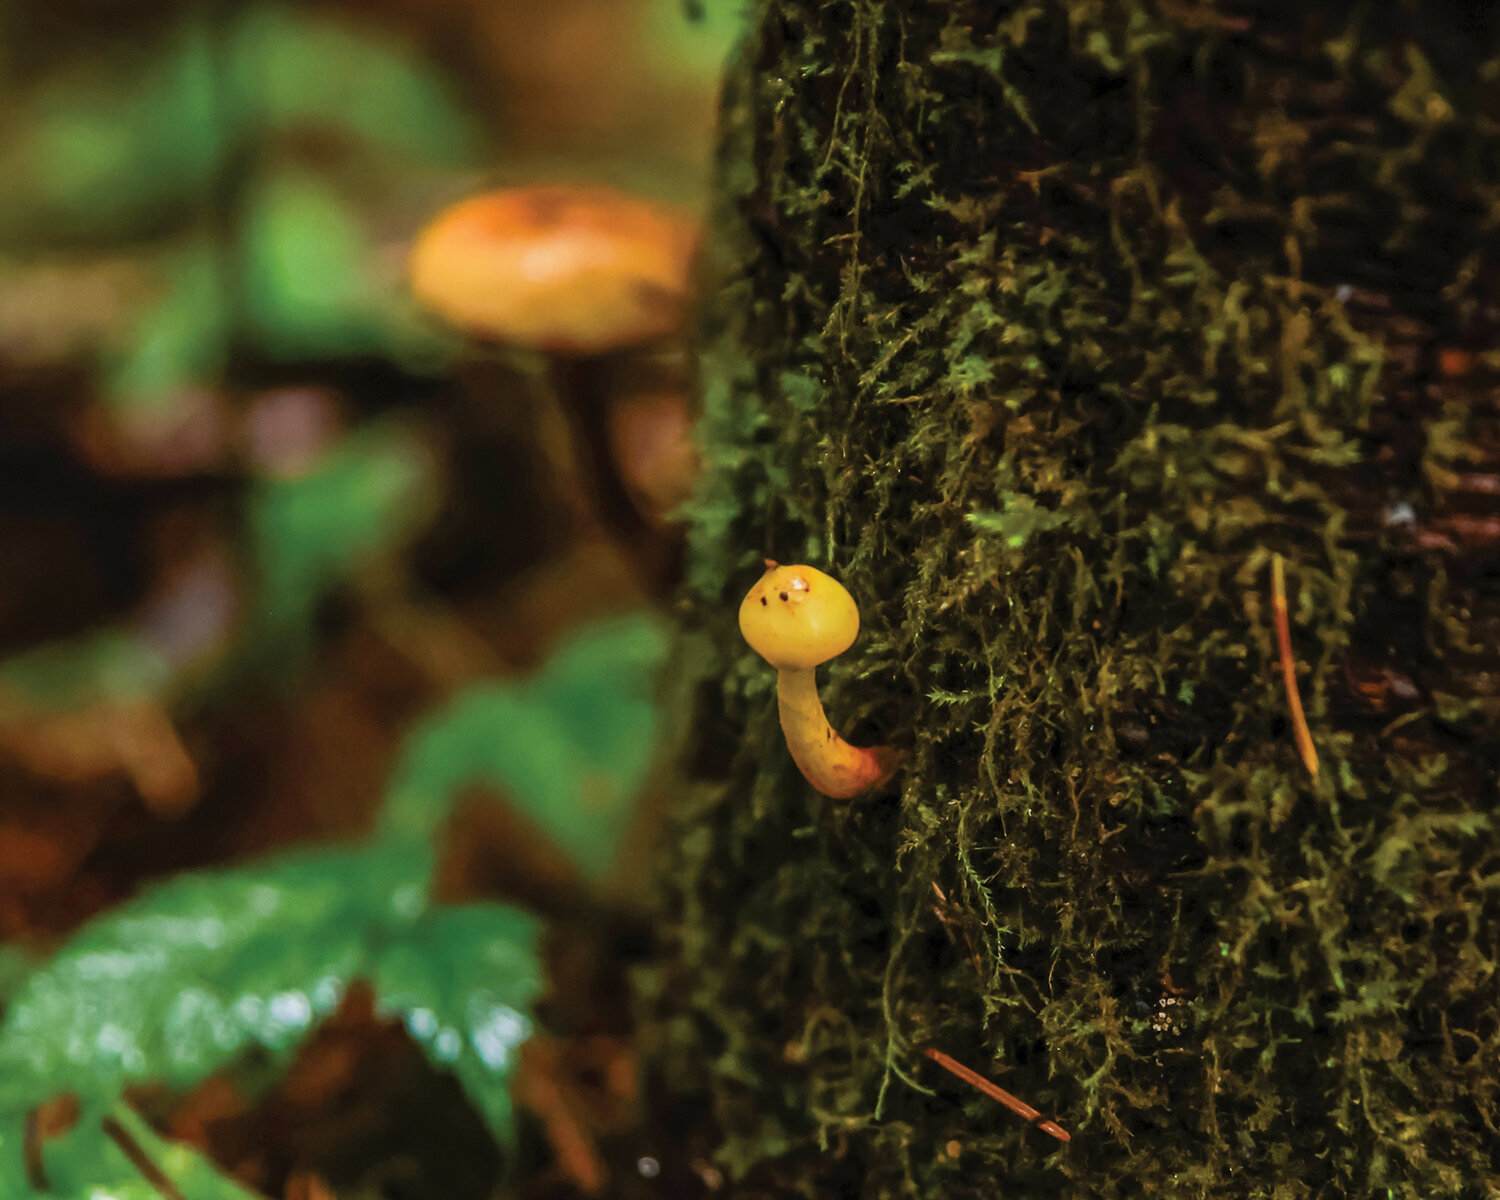 A very small mushroom gets its start on the side of a tree within the city limits of Battle Ground on Monday, Nov. 6.